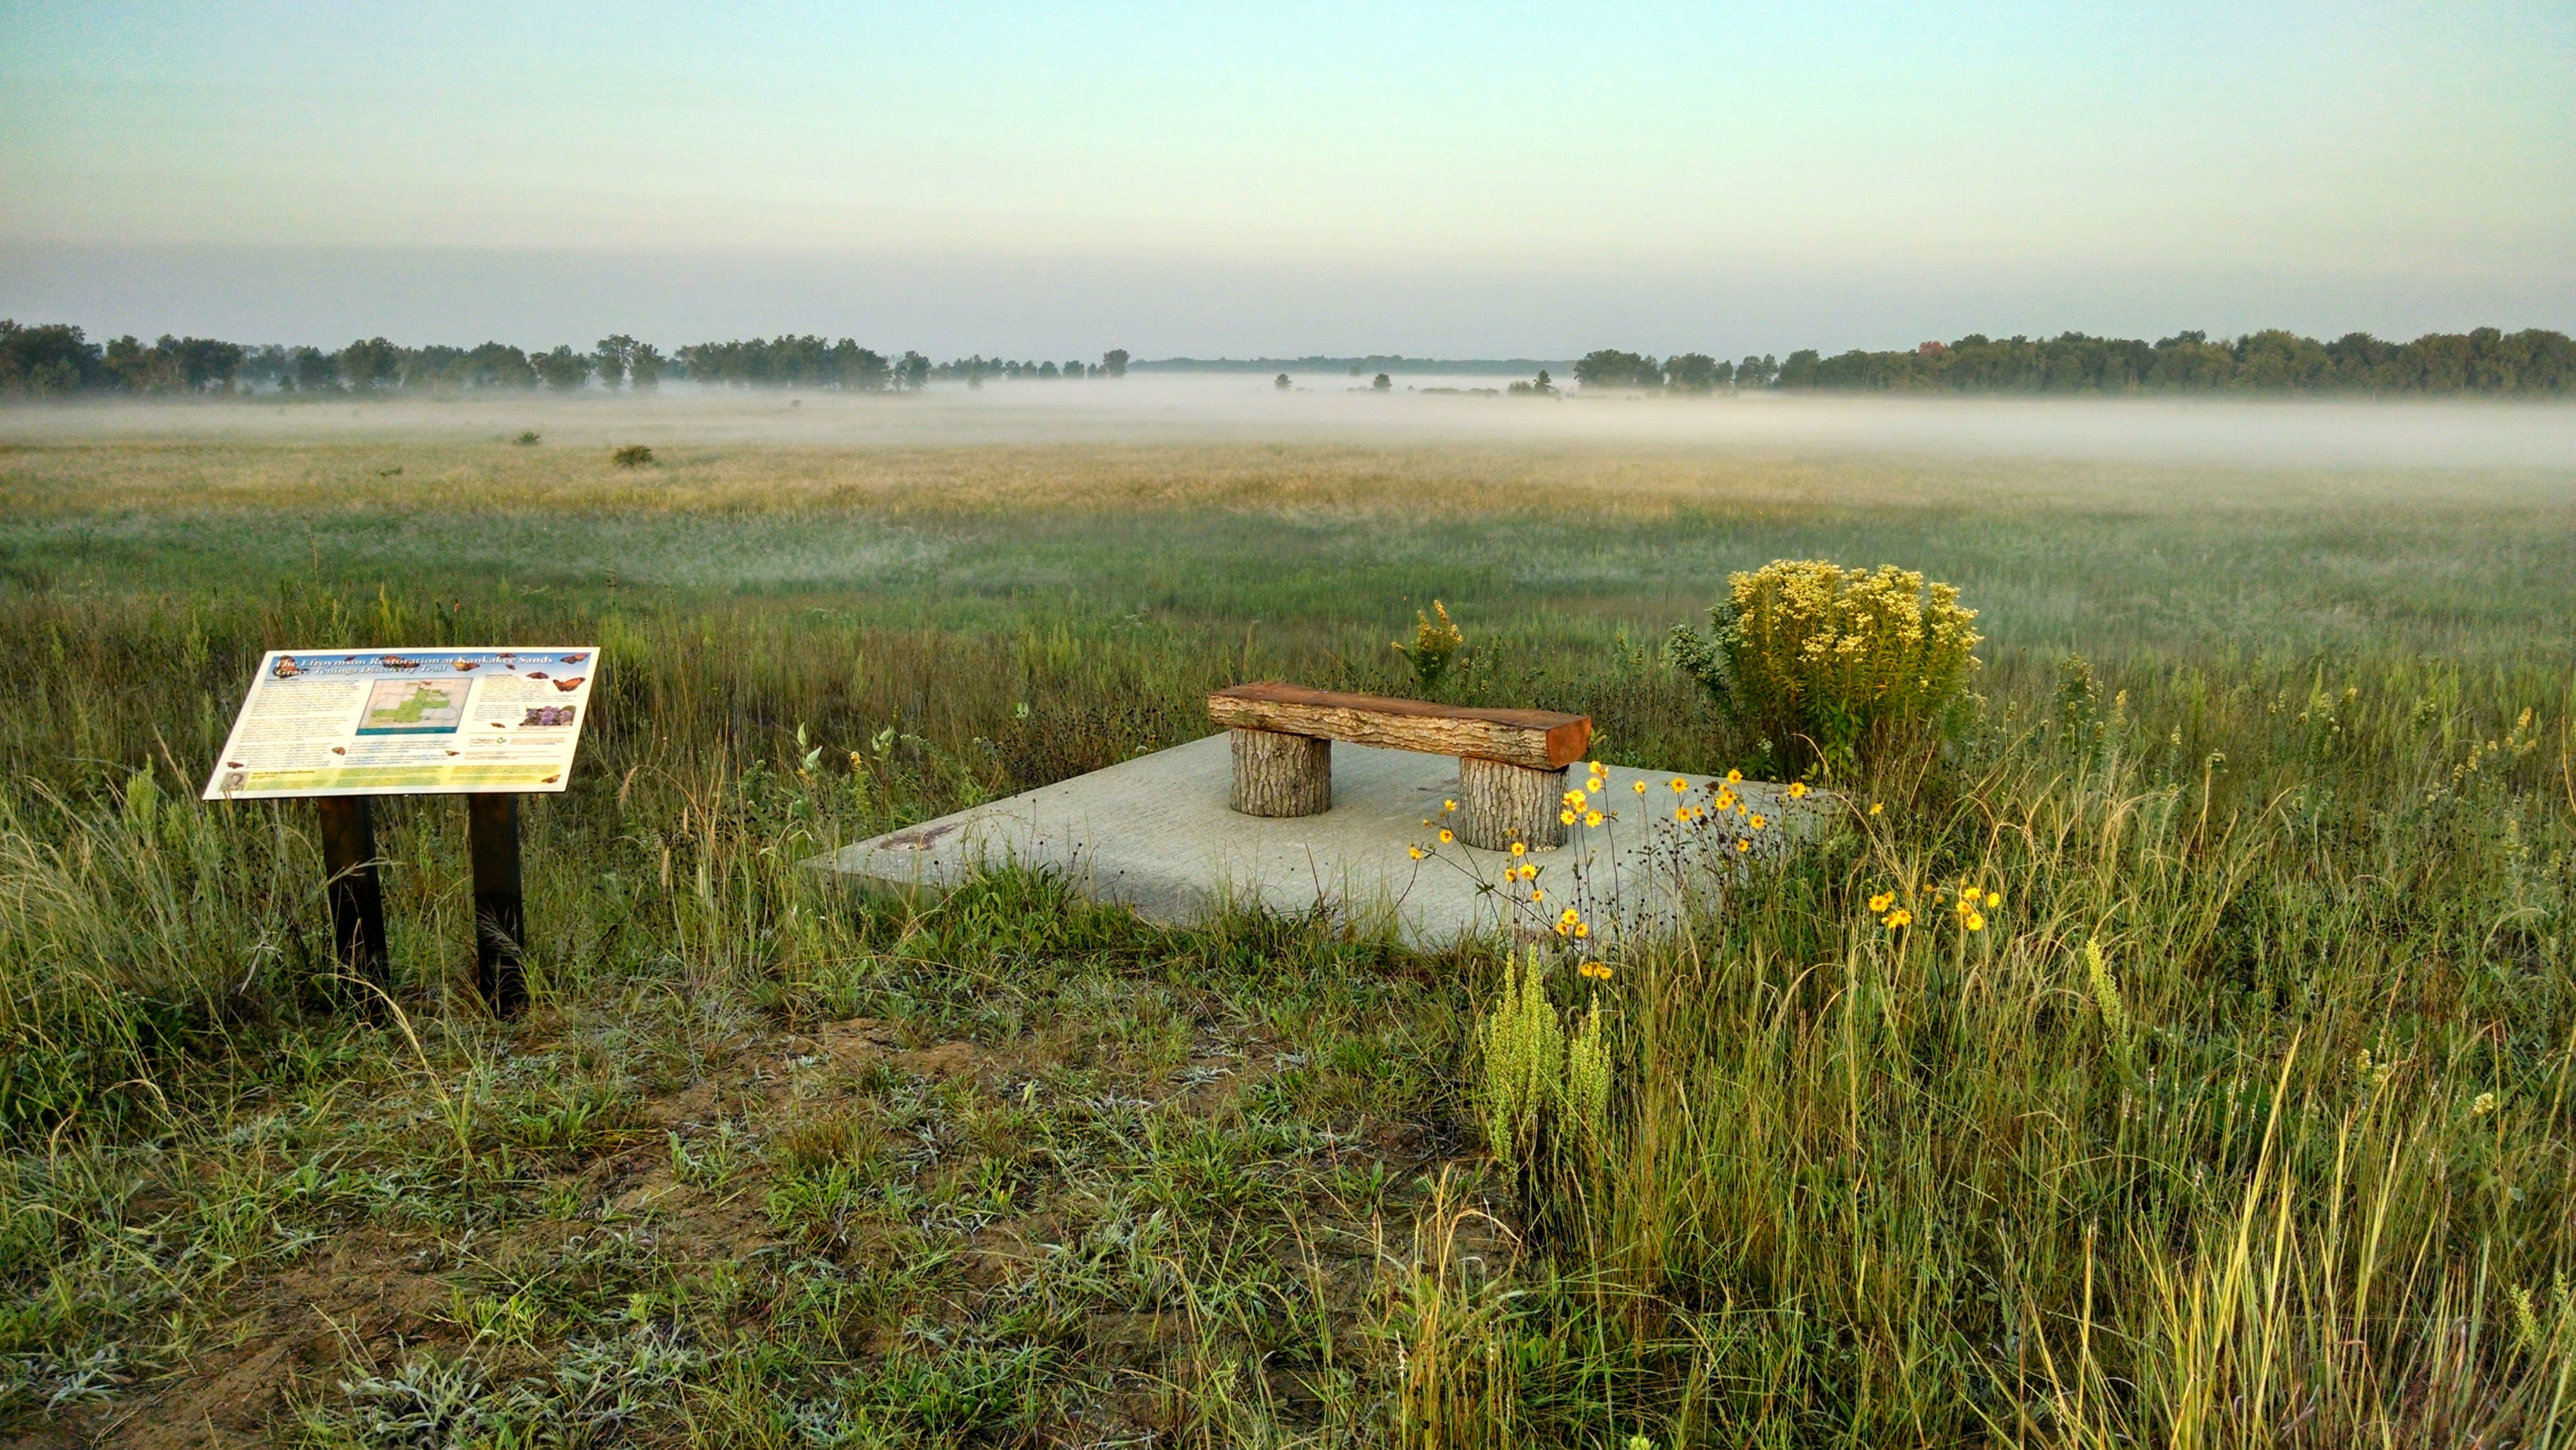 An overlook with signage and a bench looking out onto a misty prairie landscape.